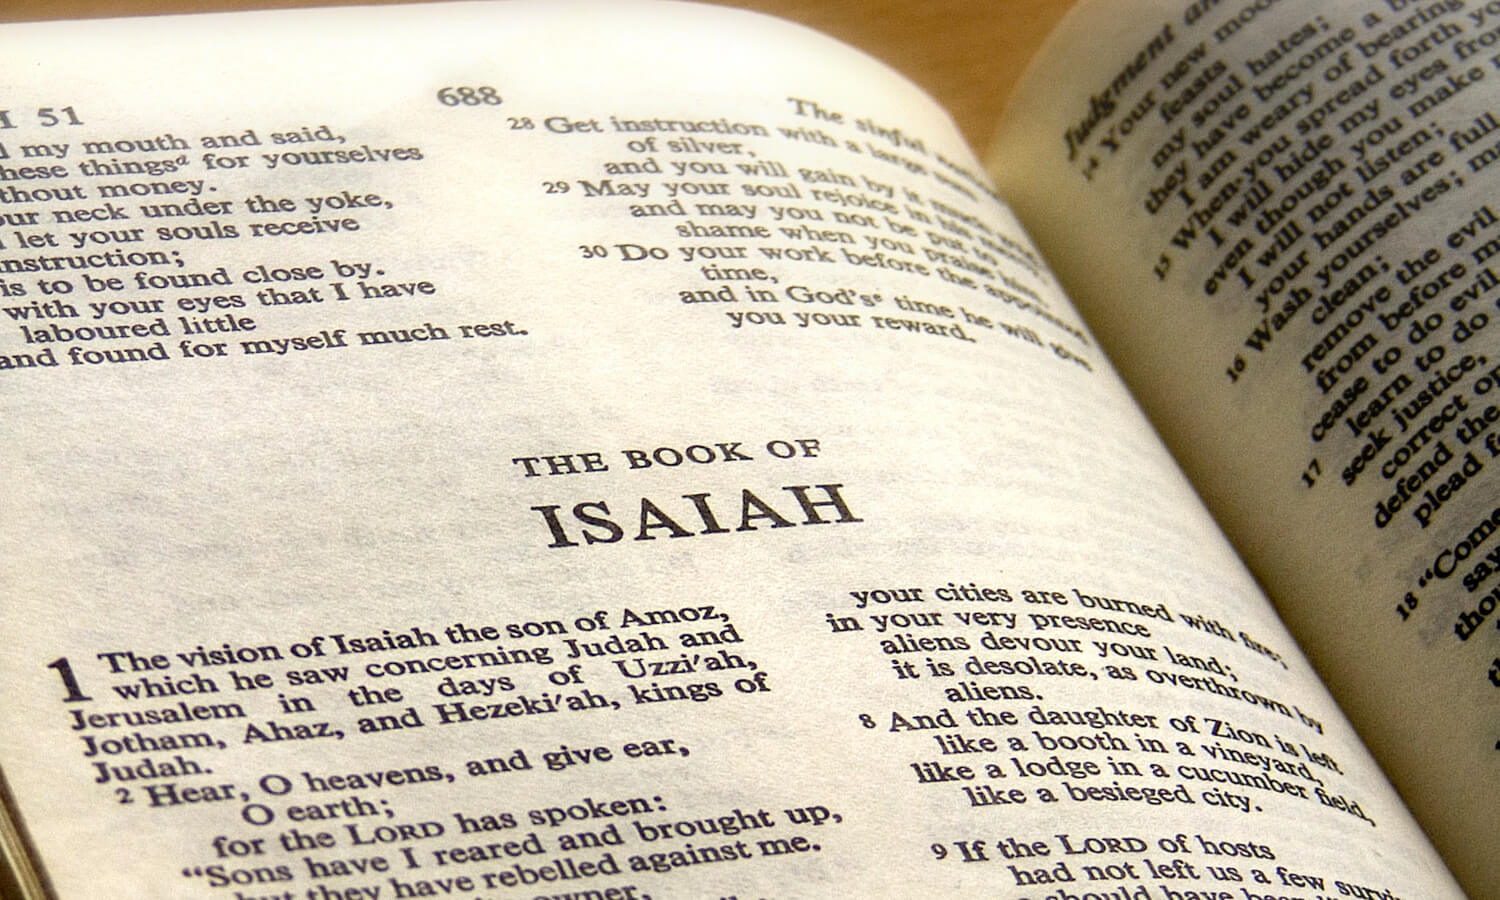 12 Wonderful promises for you from Isaiah chapter 65